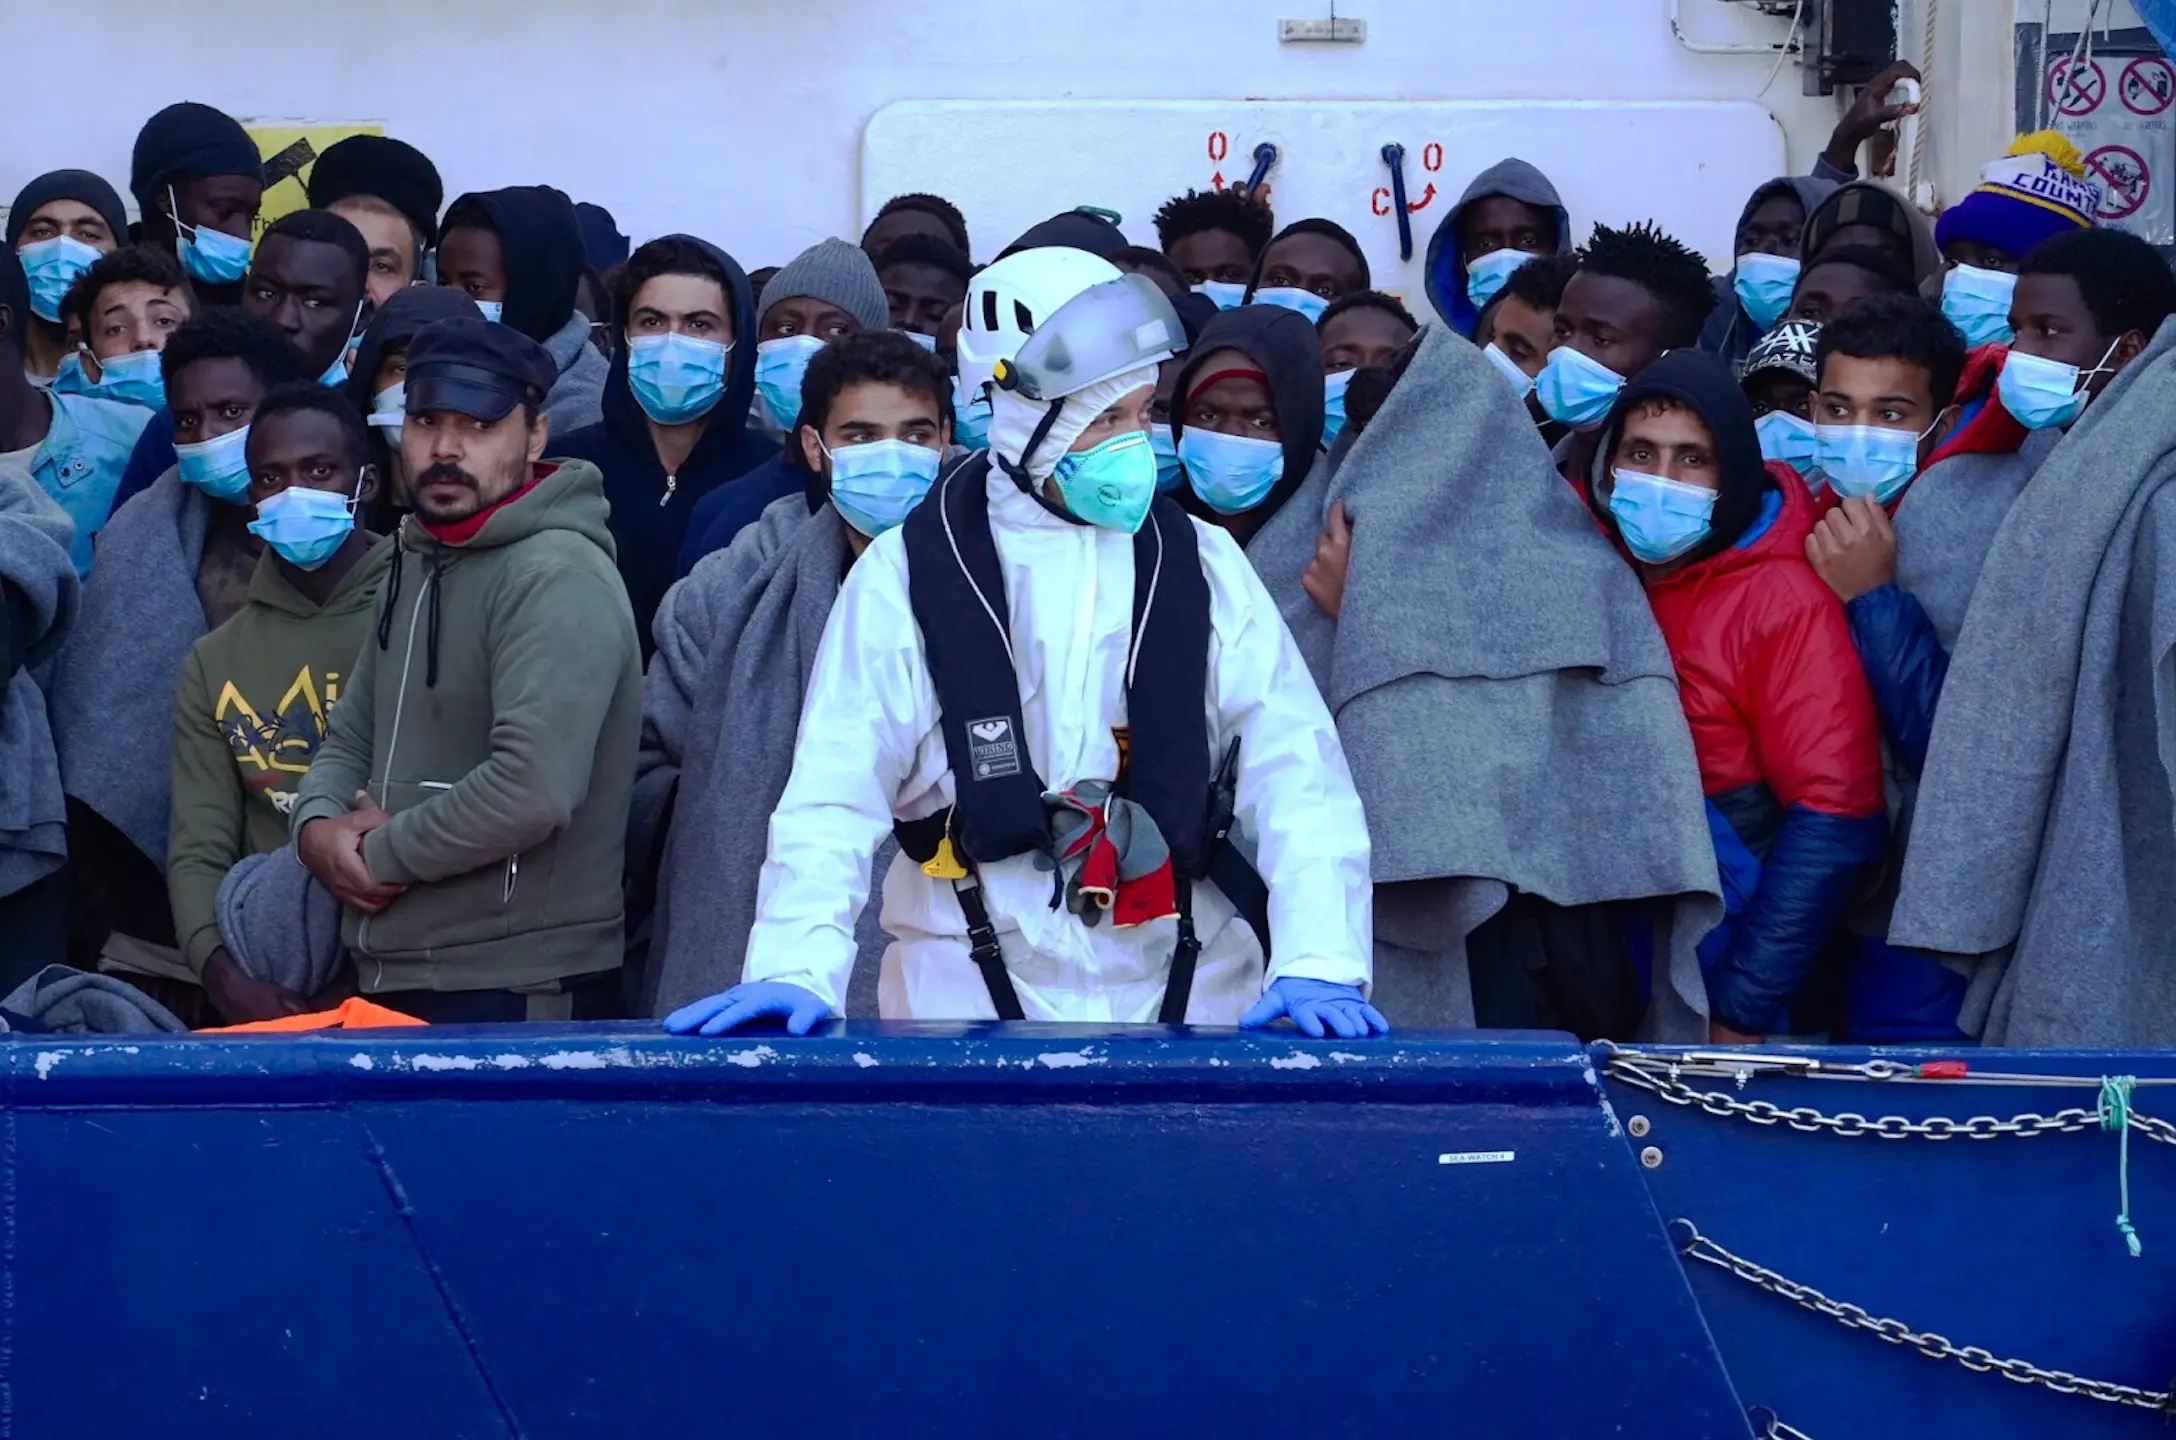 A rescue boat full of migrants waits to dock in Sicily.